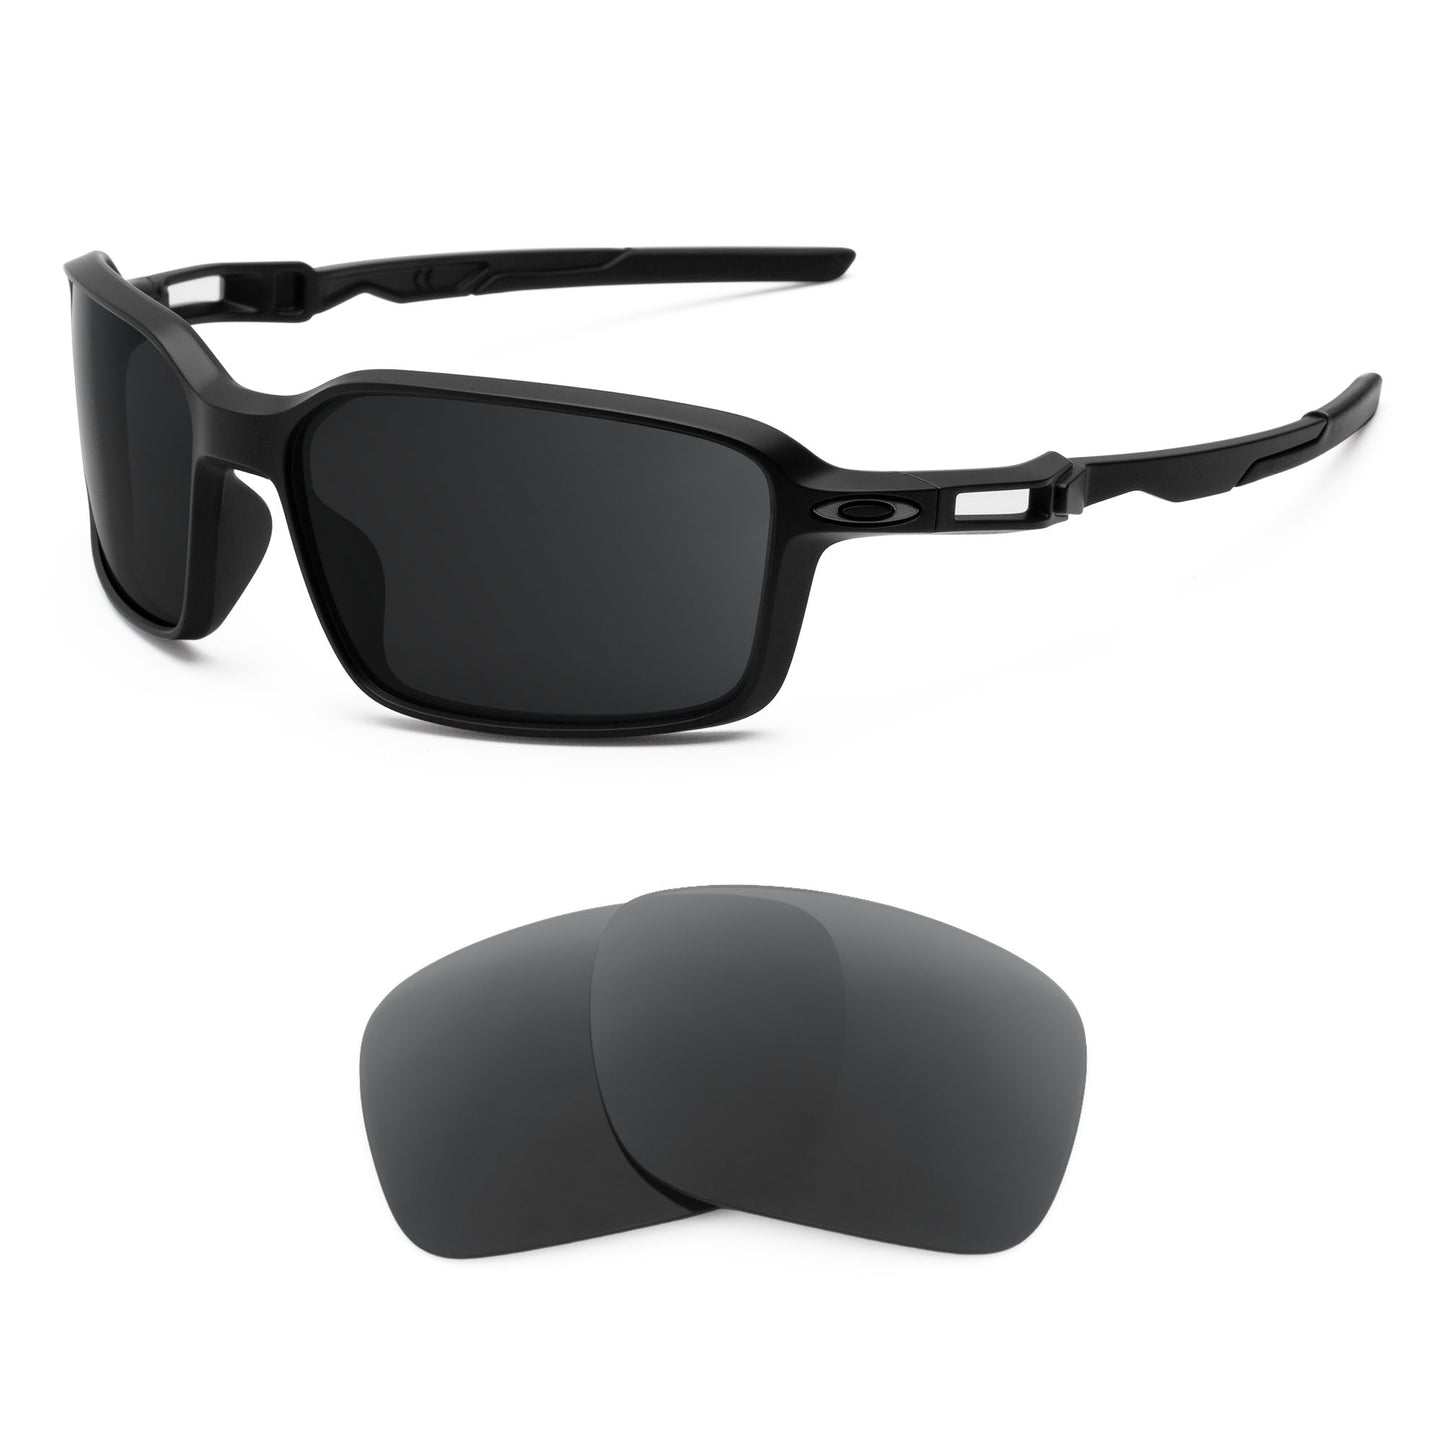 Oakley Siphon sunglasses with replacement lenses